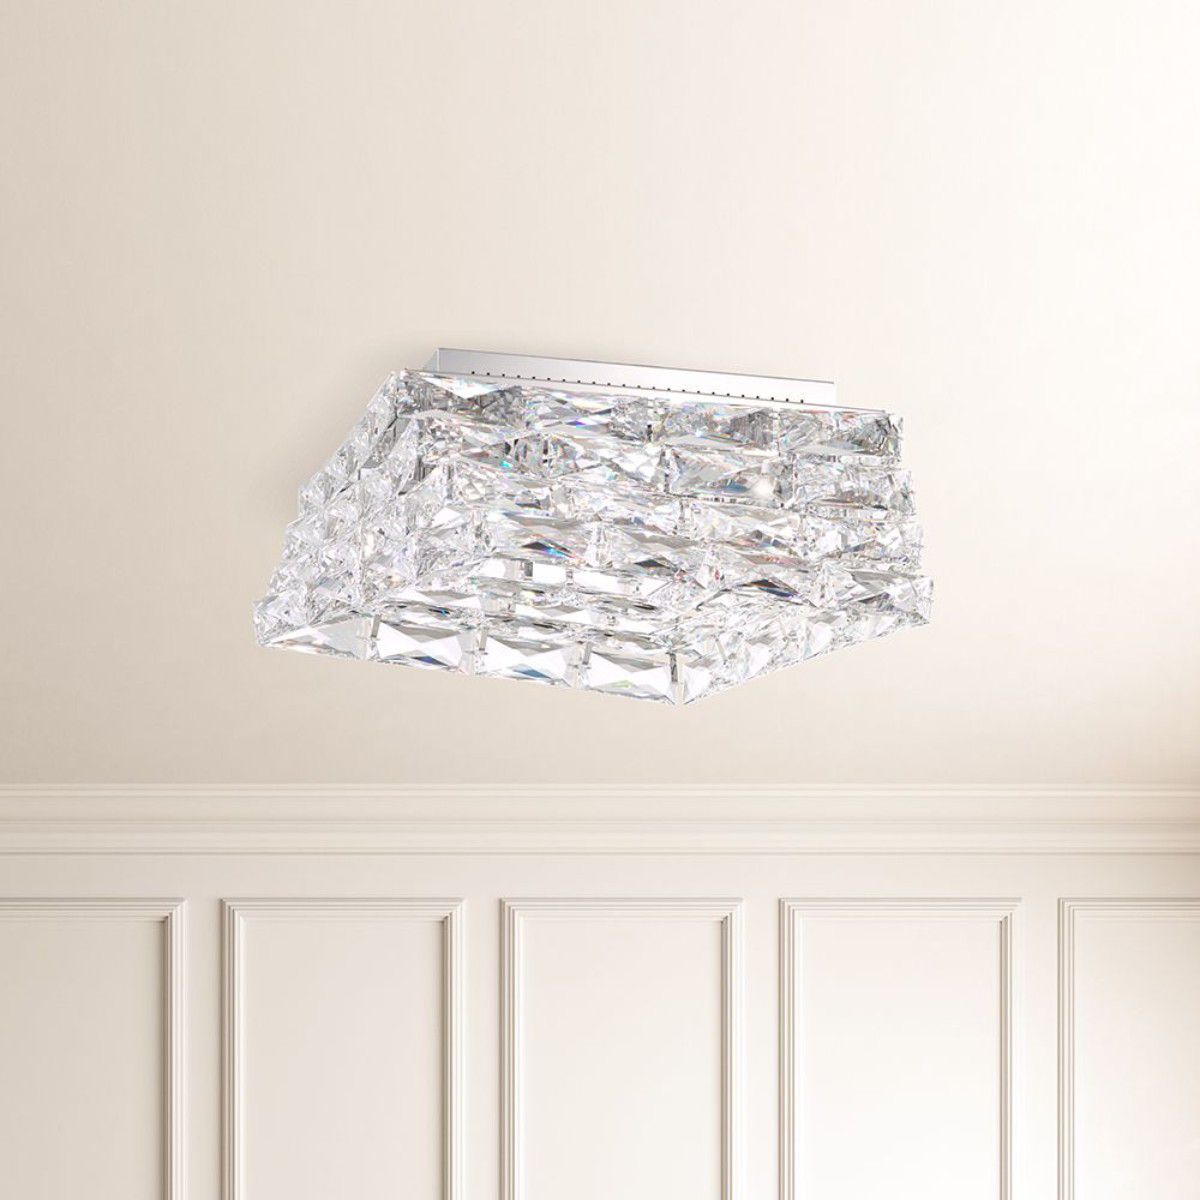 Glissando LED 16 in. Stainless Steel Semi Flush Mount Light with Crystals from Swarovski